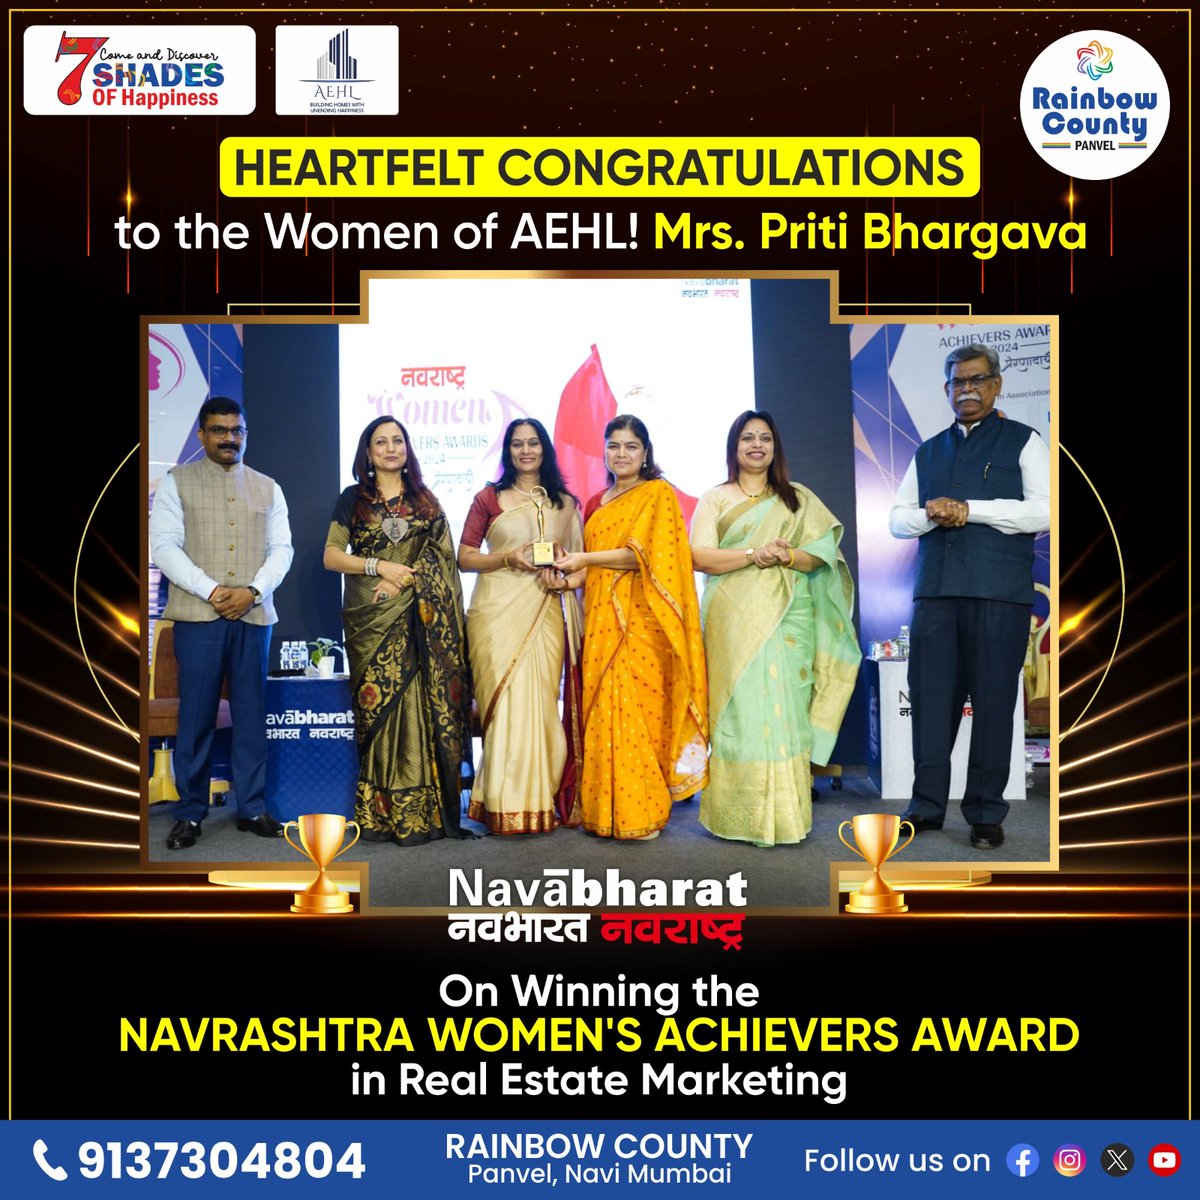 🎉👏 Heartfelt congratulations to the Women of AEHL! 🌟 

Winning the NAVRASHTRA WOMEN'S ACHIEVERS AWARD in Real Estate Marketing is a testament to your dedication and excellence. 🏆 

#AEHL #WomenAchievers #RealEstateMarketing #NavrashtraAward #DreamHomes